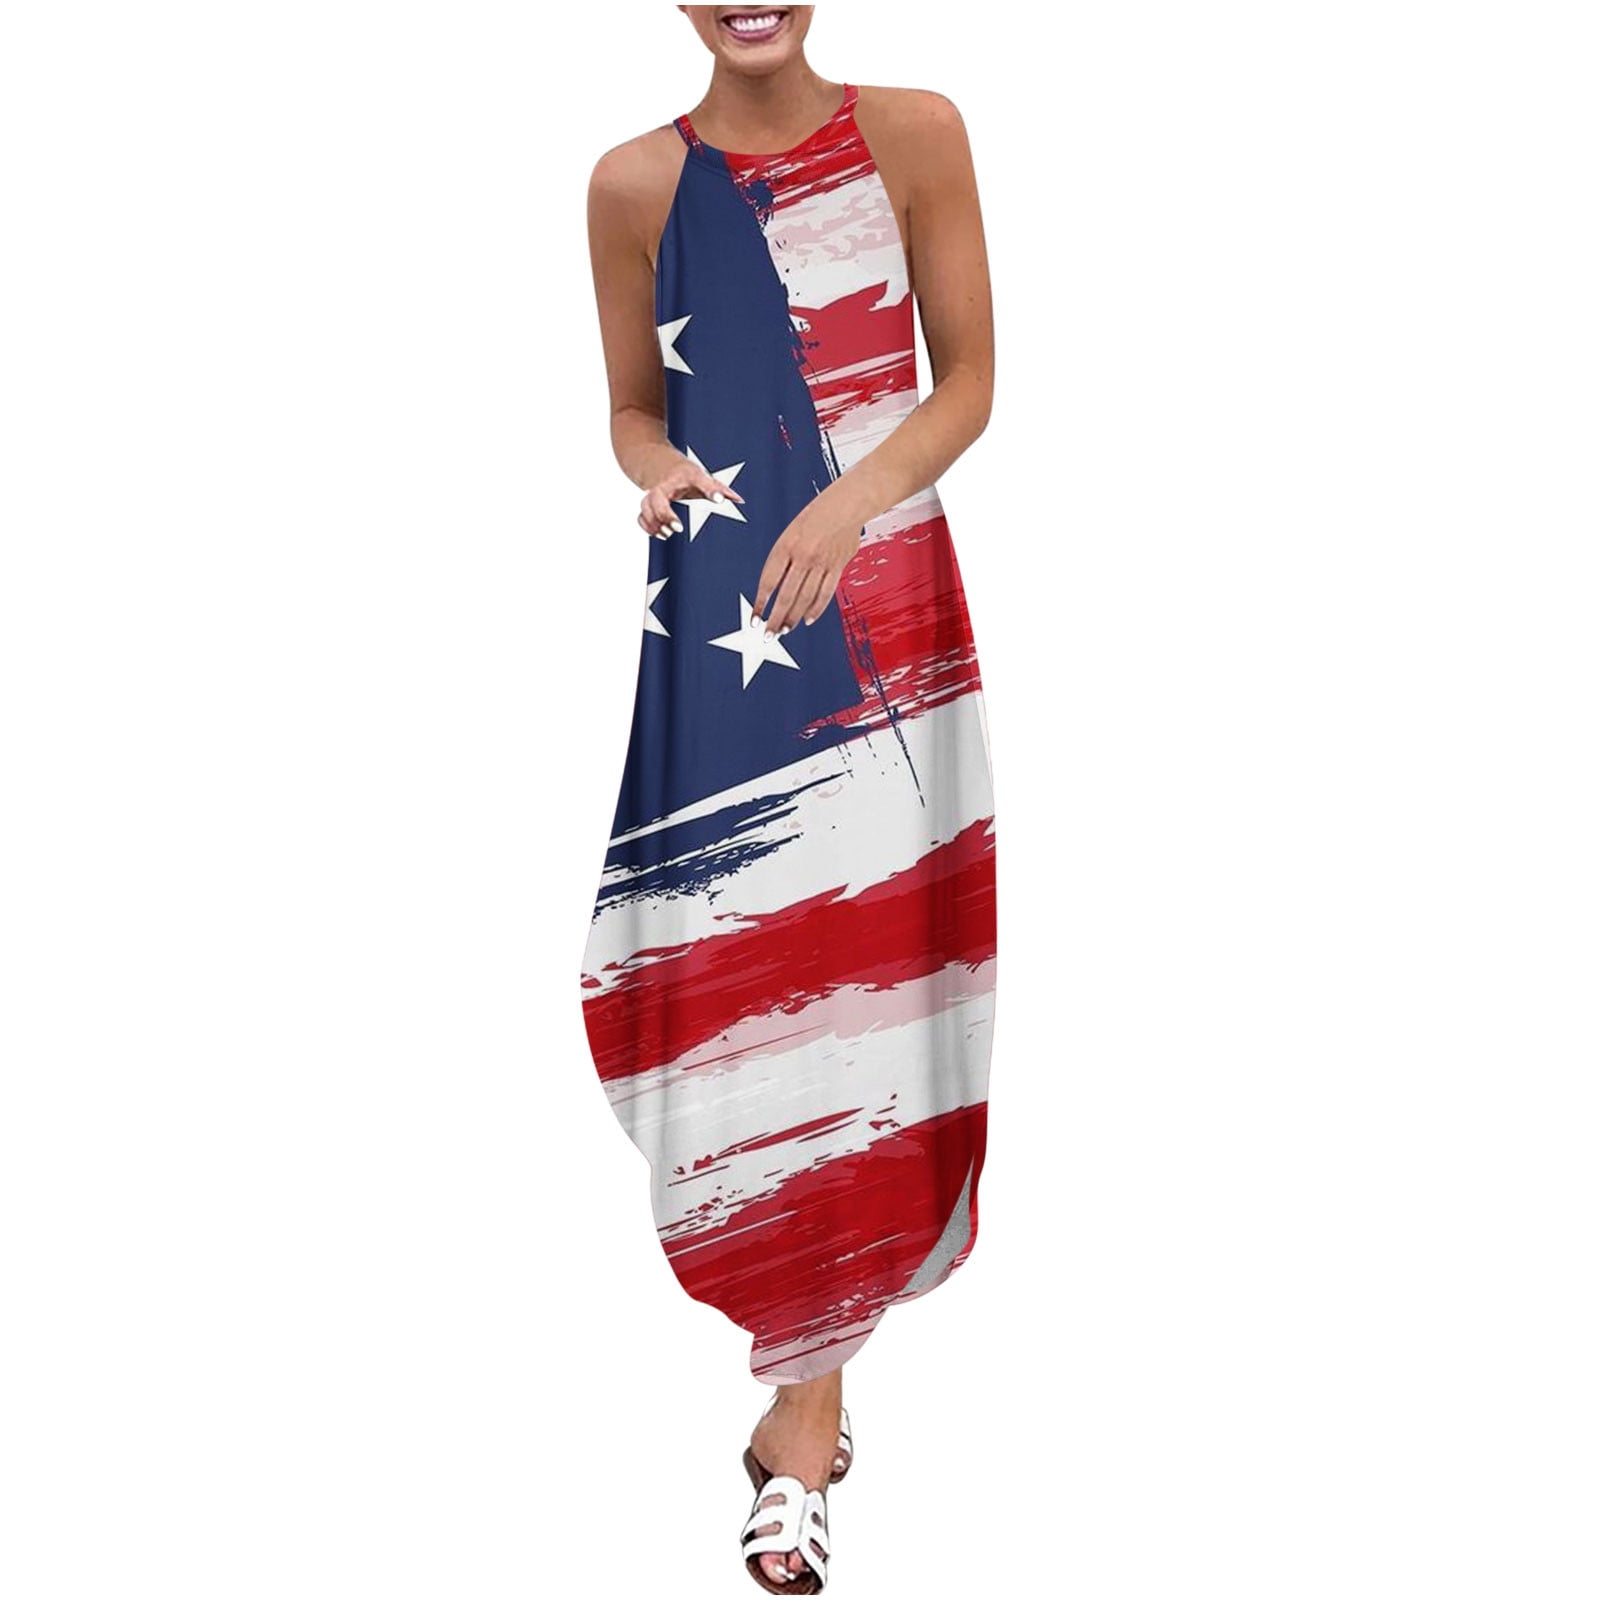 Womens 4th of July Flowy Dresses Fashion American Flag Mini Halter Dress Casual Summer Holiday Party Beach Sundress 